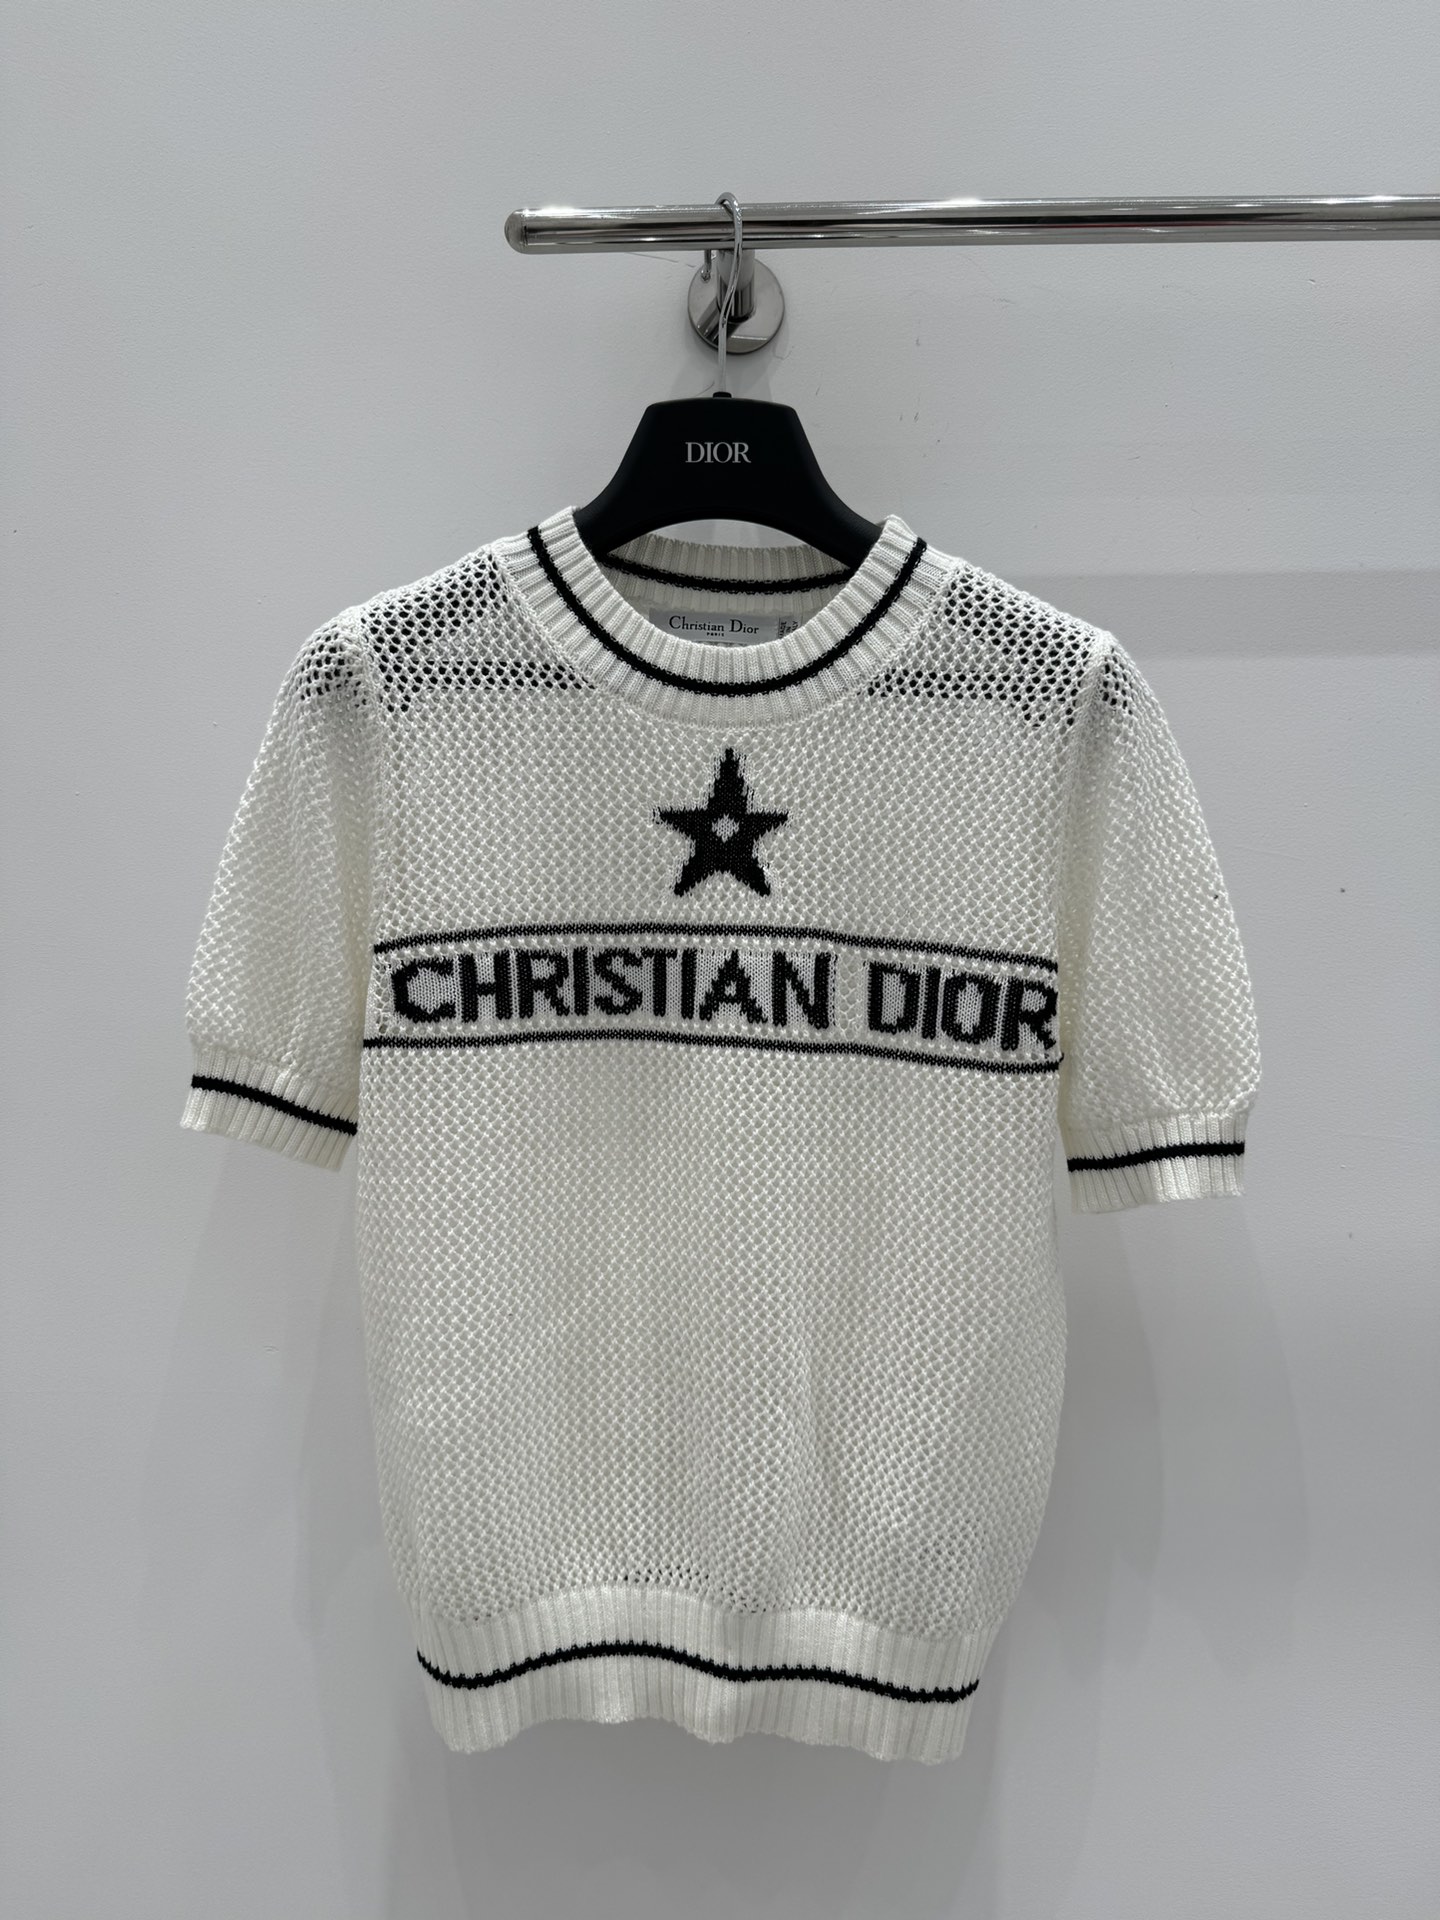 Dior Clothing Knit Sweater Shirts & Blouses Black White Openwork Knitting Spring/Summer Collection